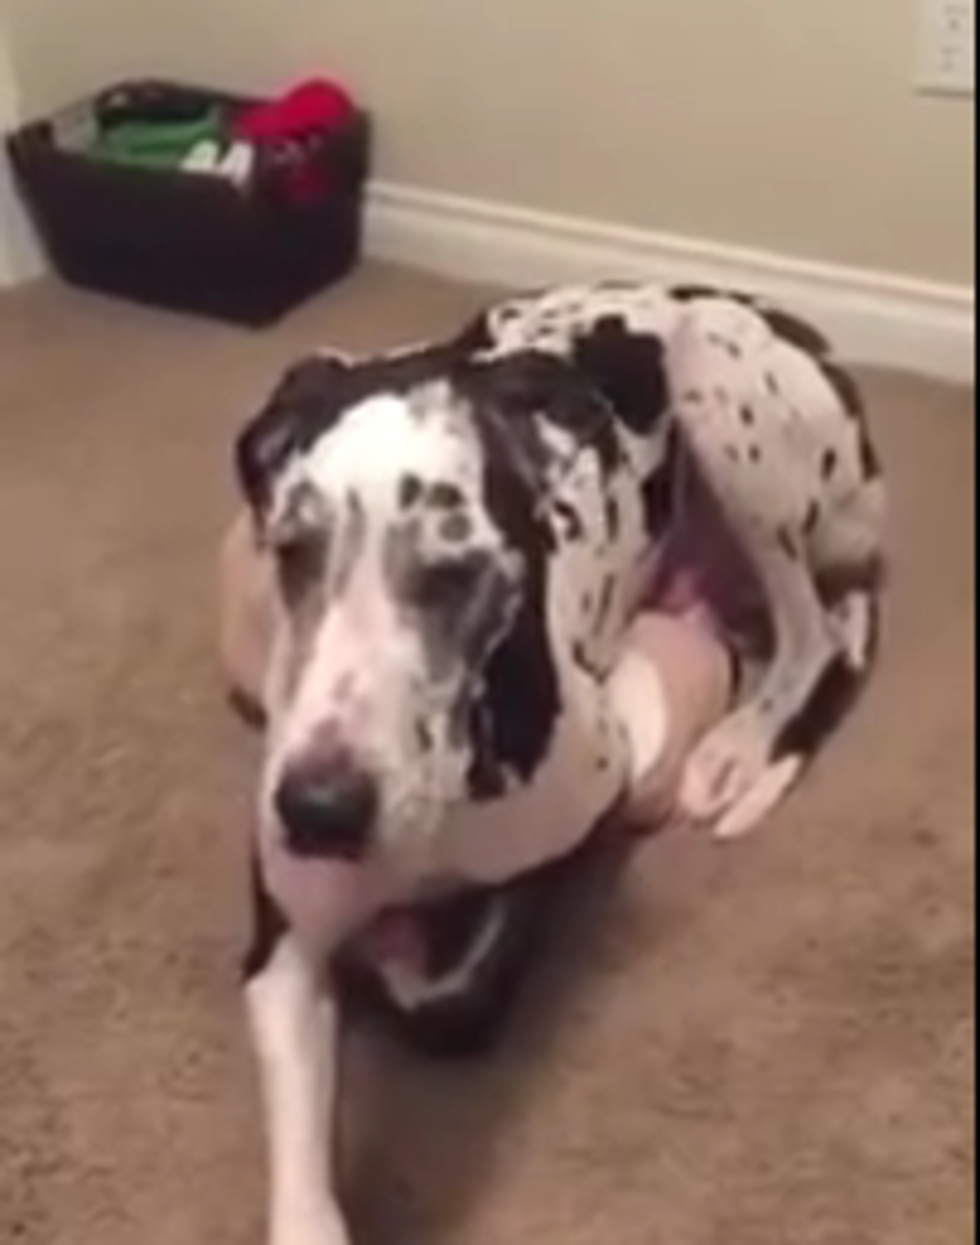 Great Dane Is Too Big For Dog Bed [Video]